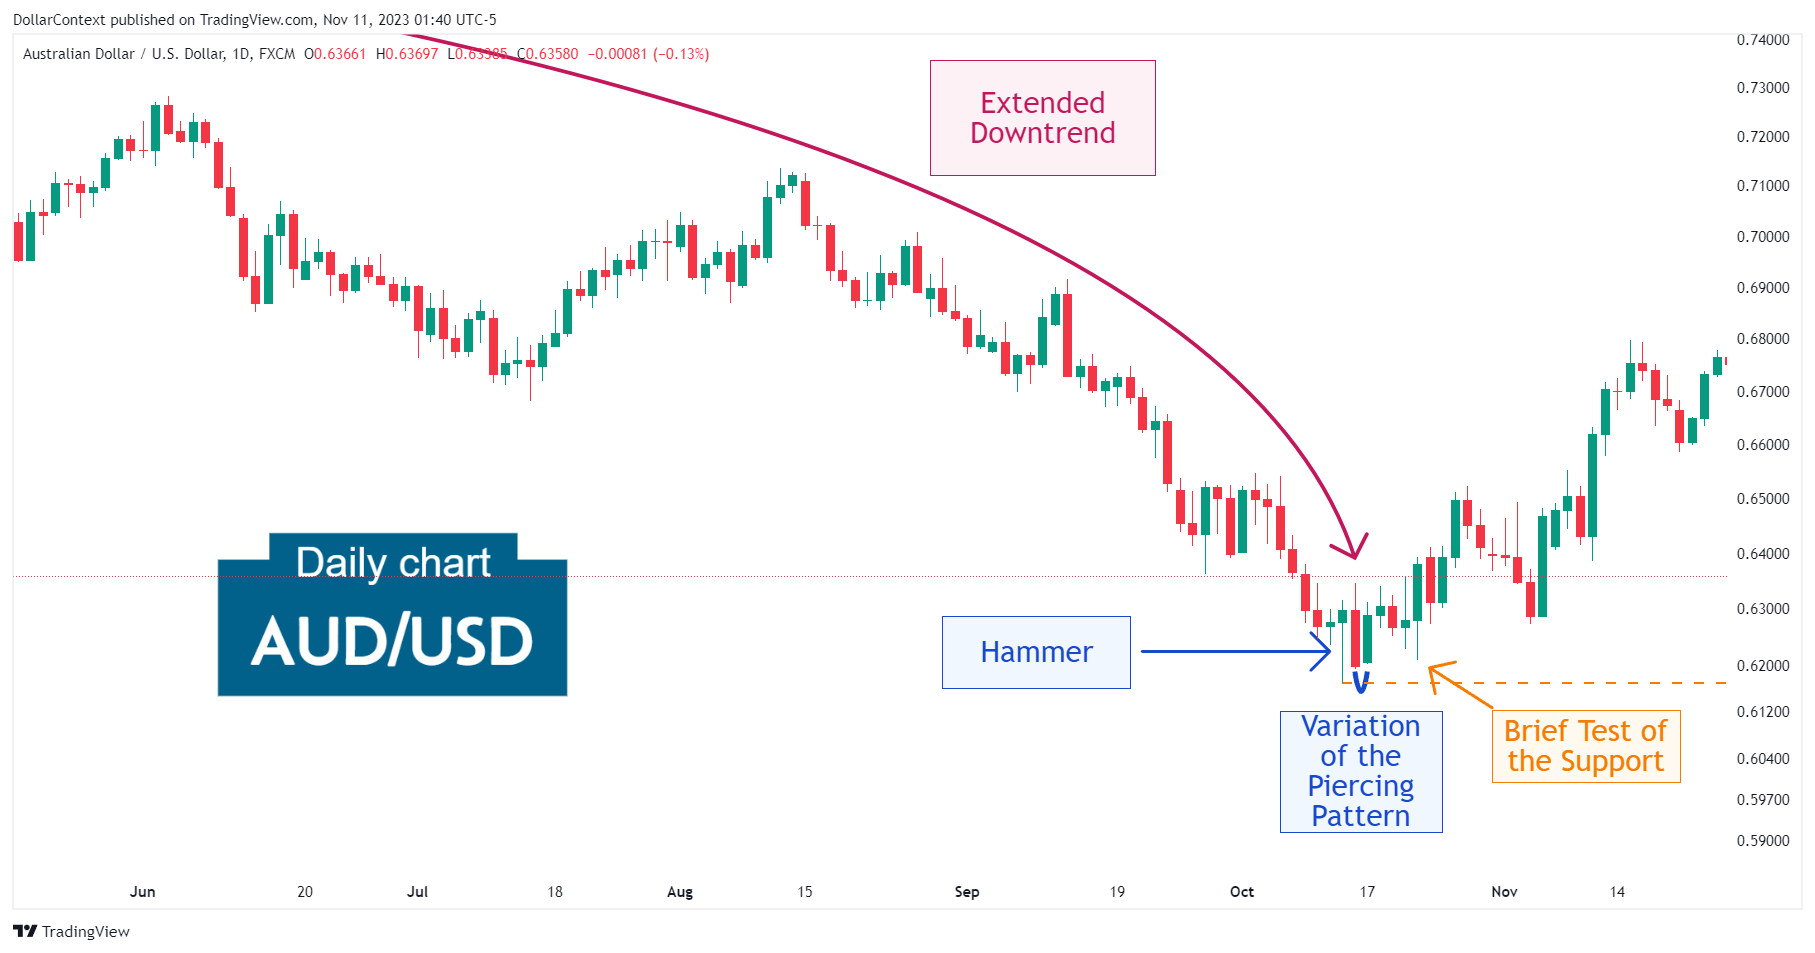 AUD/USD: Brief Retest of the Support in October 2022 (Daily Chart)